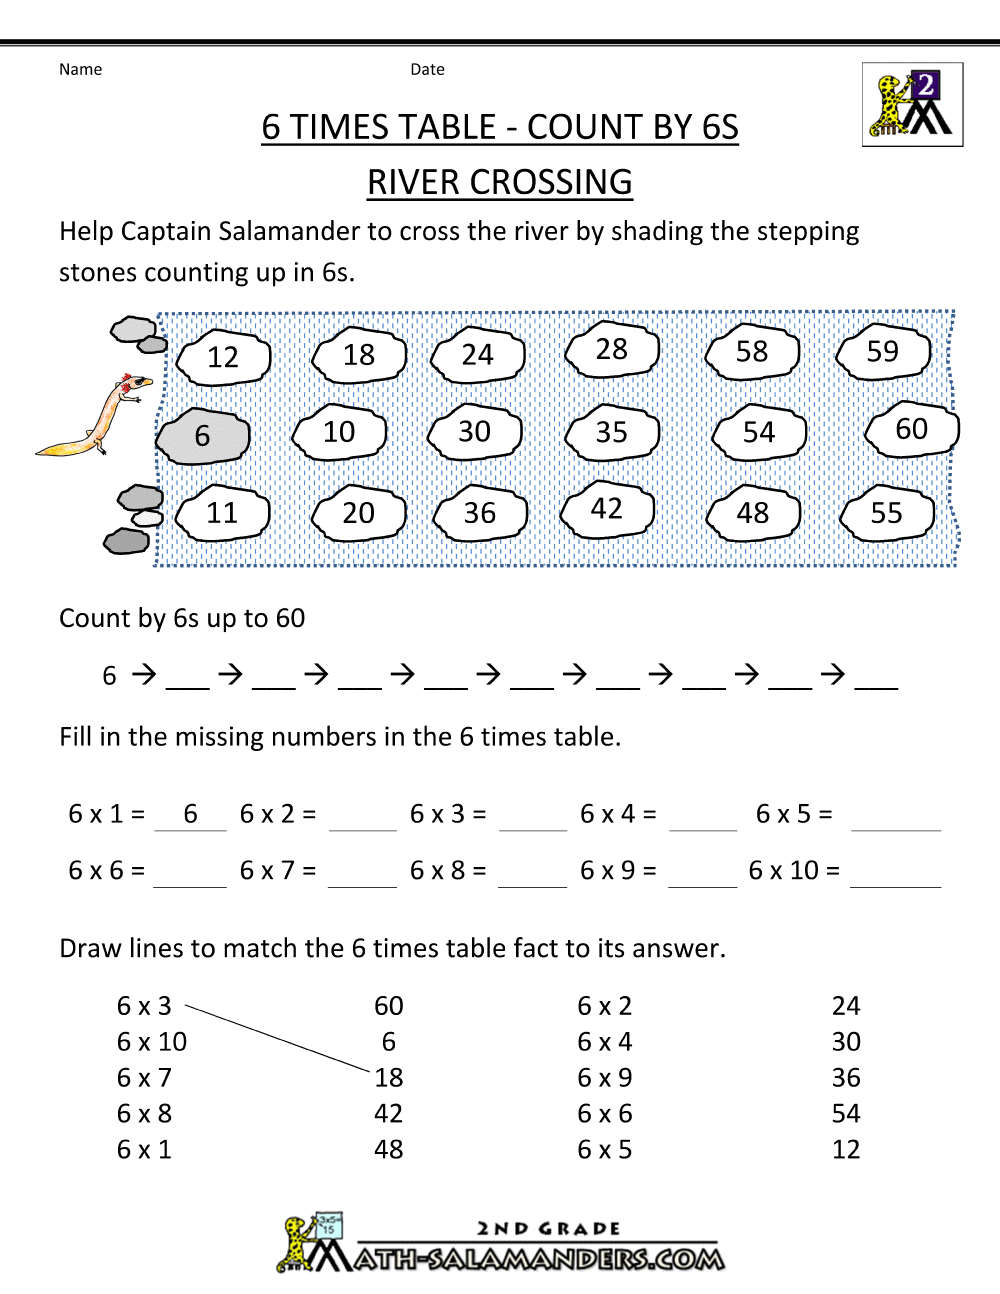 Multiplication Facts Worksheets 6s